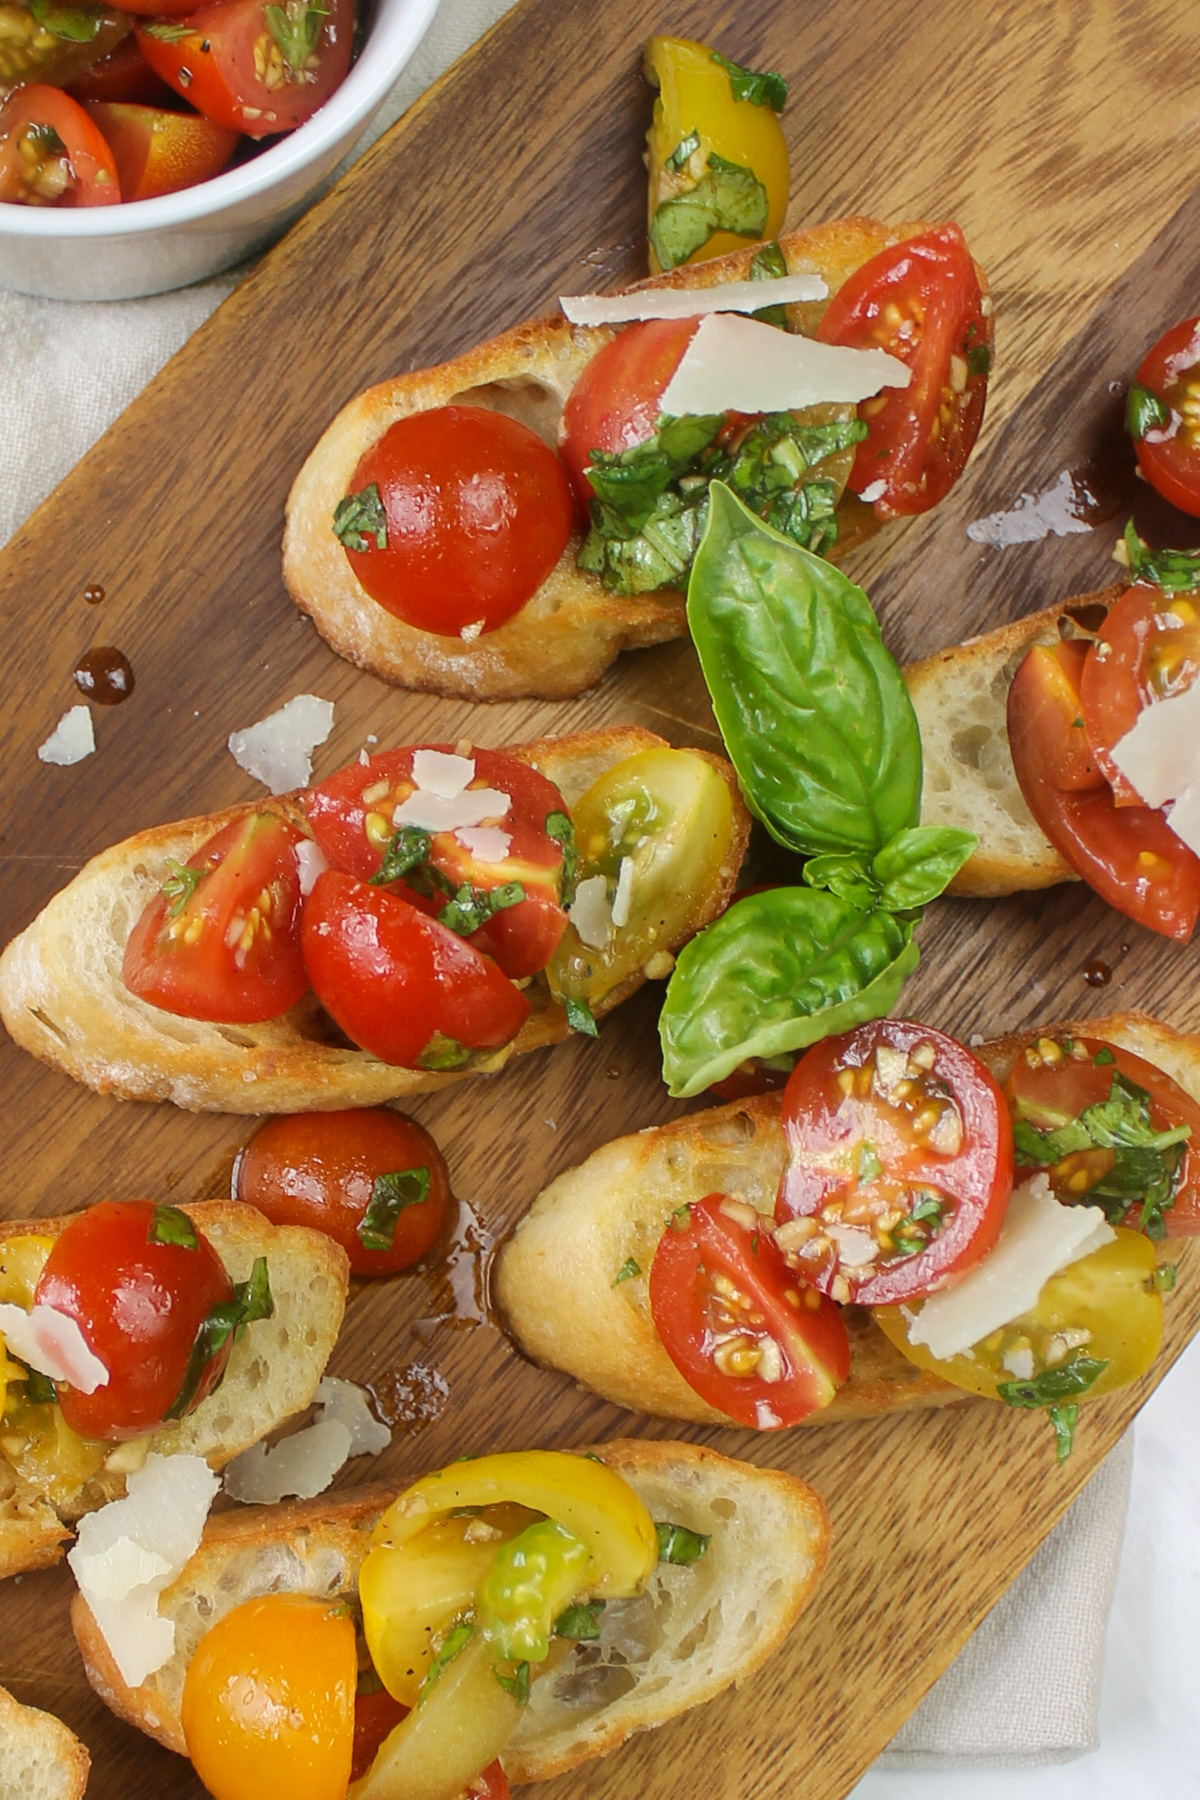 Bruschetta served on sliced baked baguette and topped with Parmesan and basil.